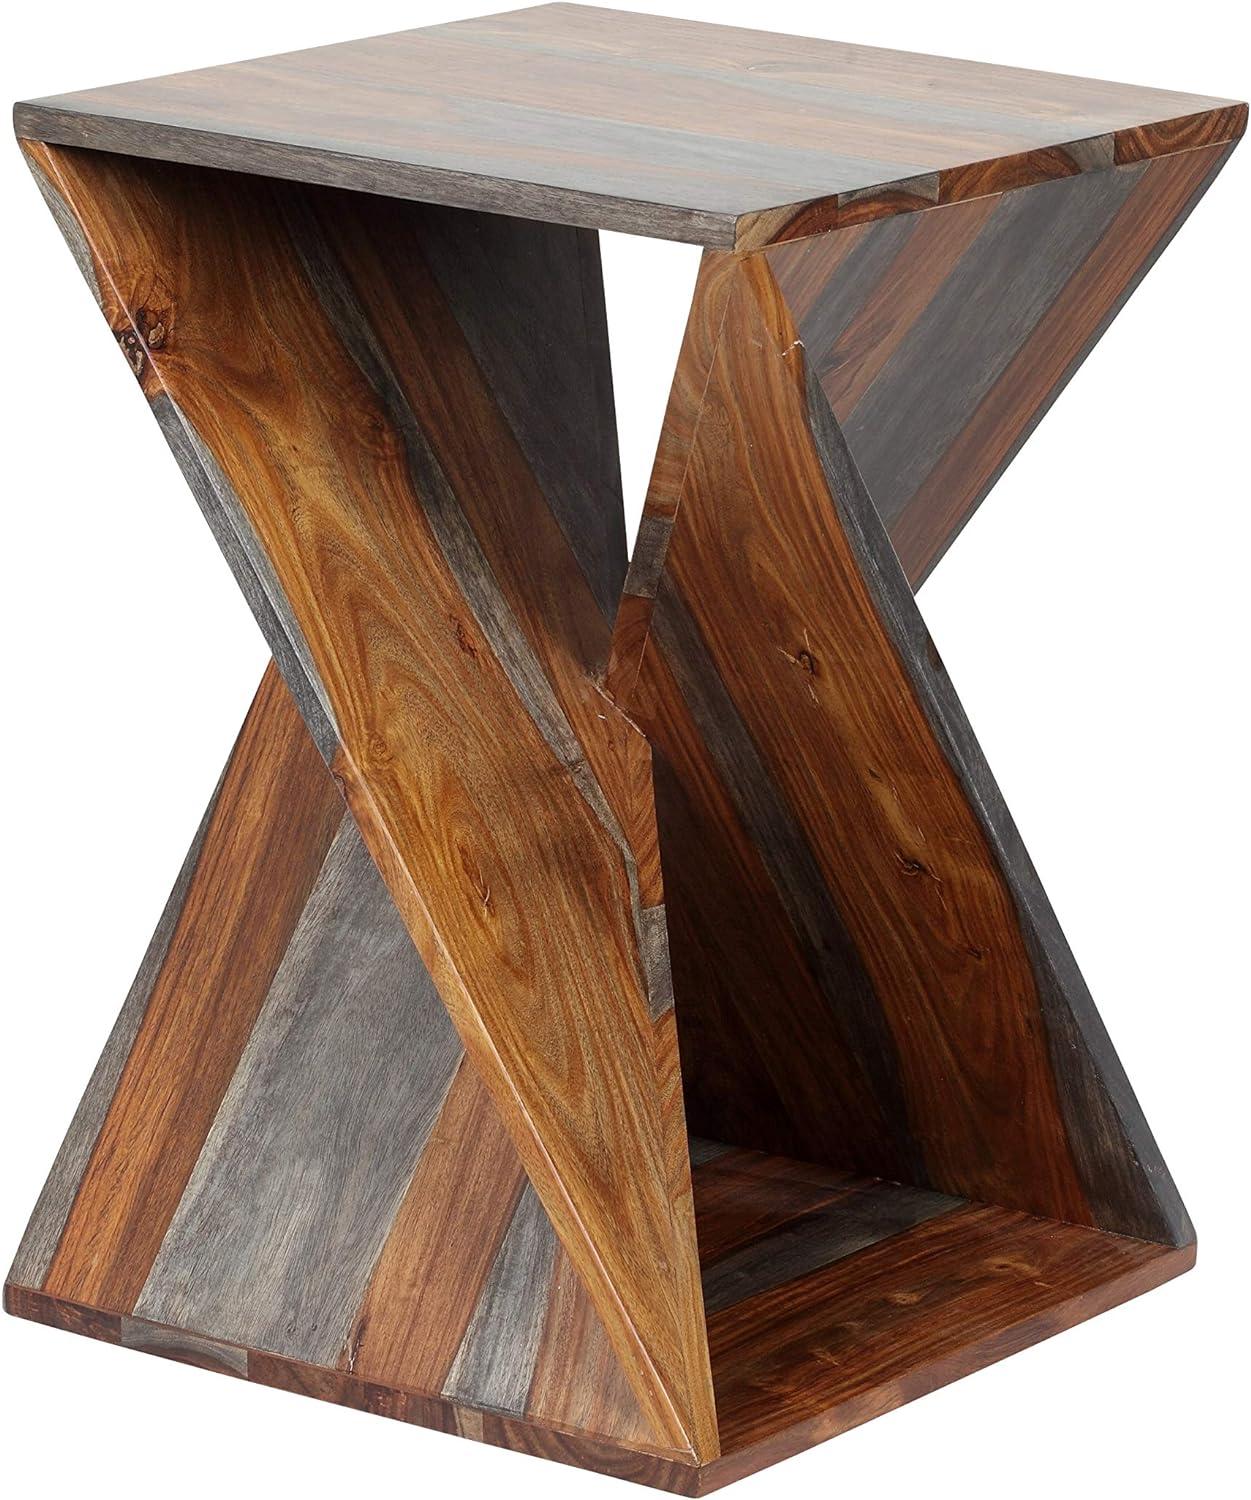 Sierra Brown Sheesham Wood Square Accent Table with Metal Storage